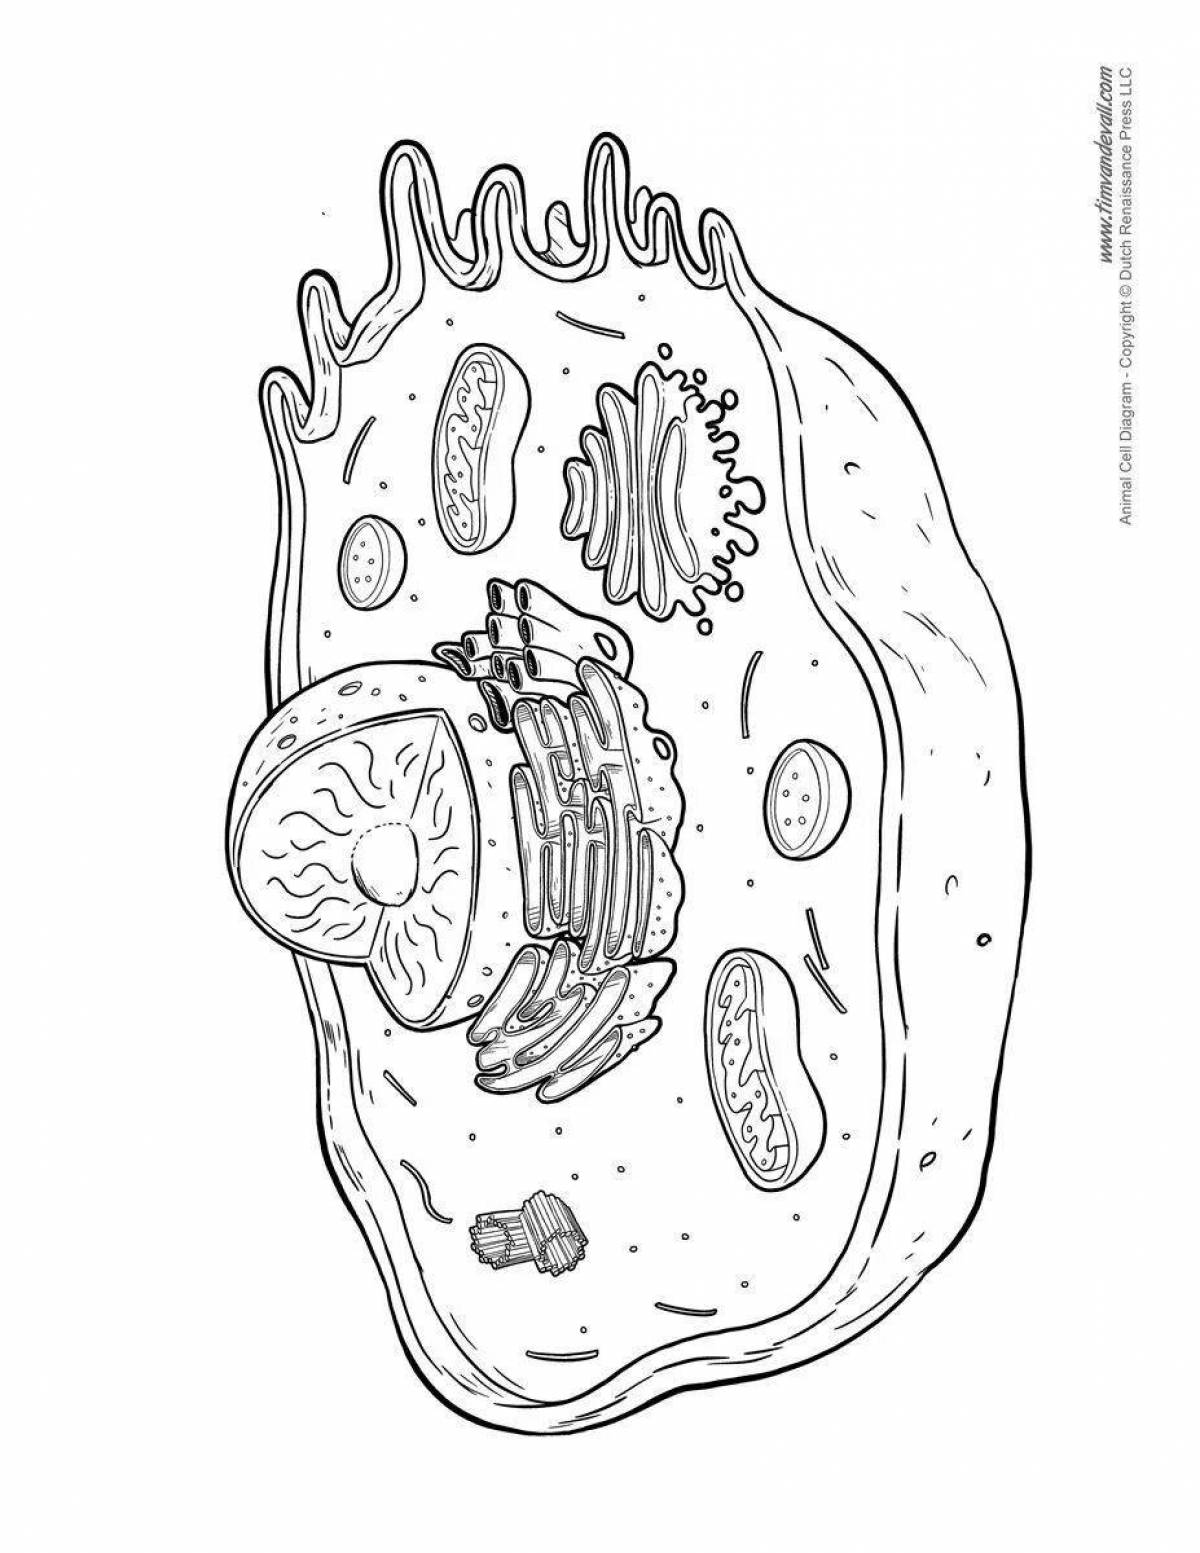 Joyful plant cell coloring page